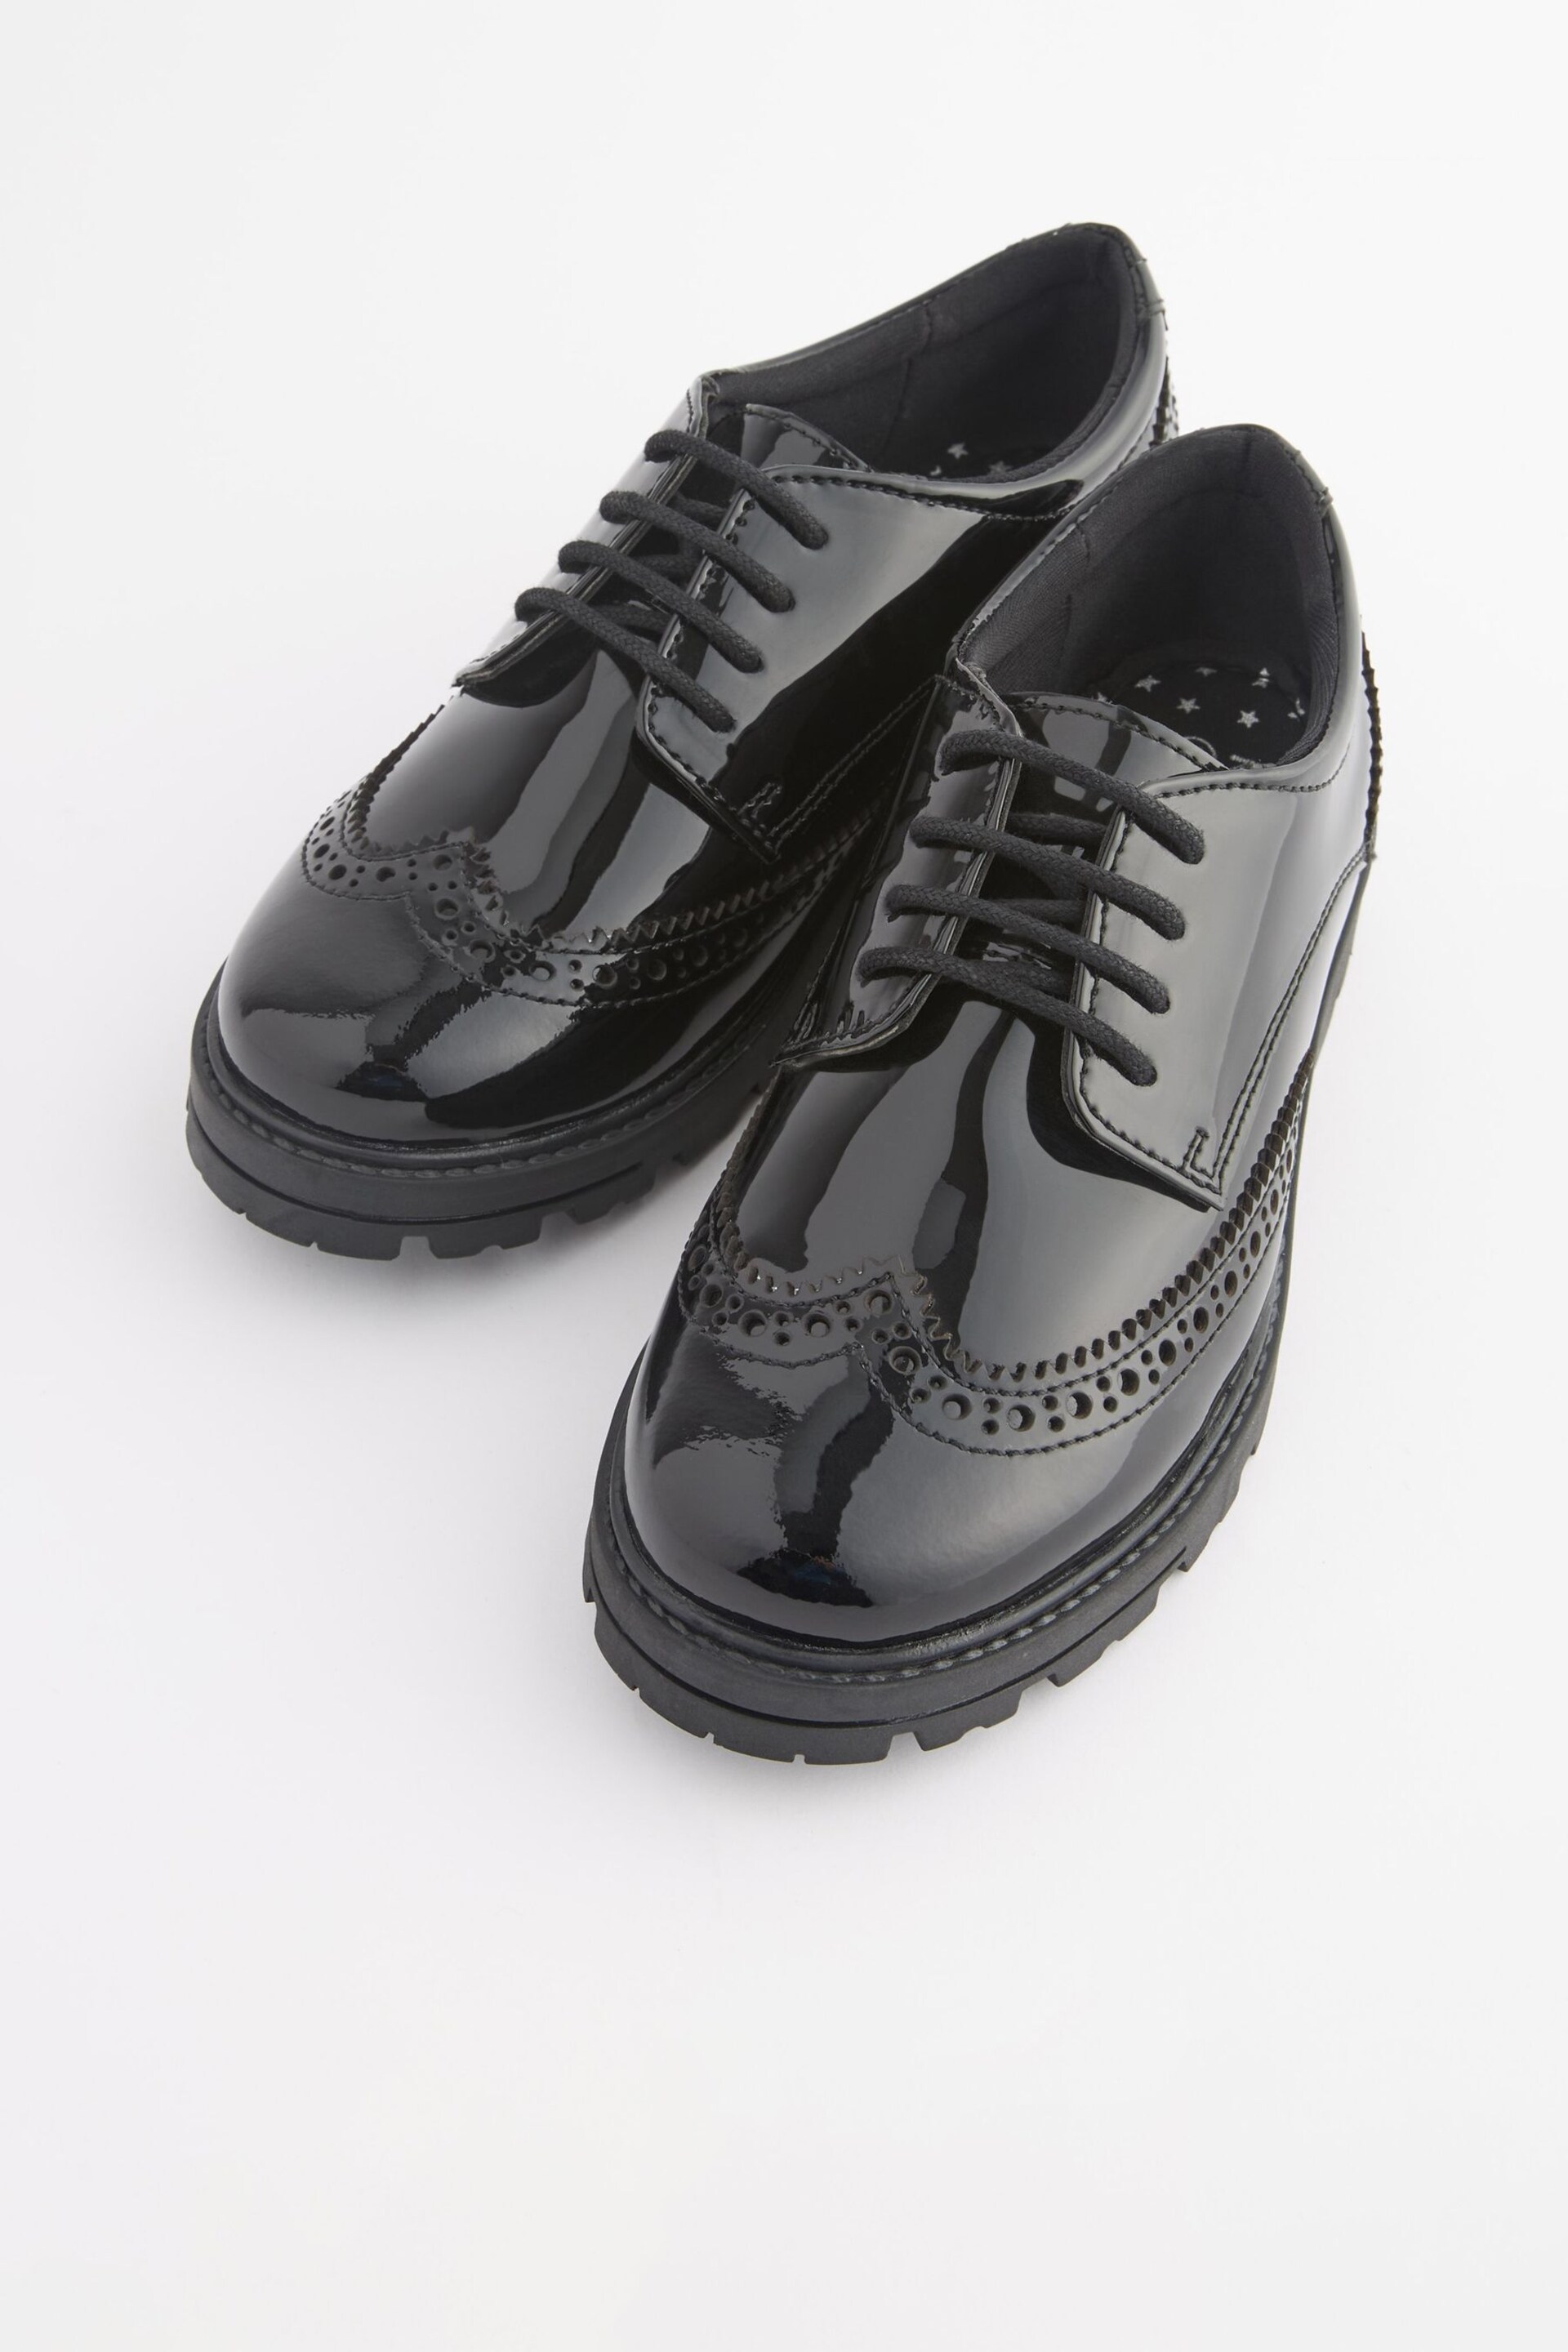 Black Patent Wide Fit (G) School Leather Chunky Lace-Up Brogues - Image 5 of 11